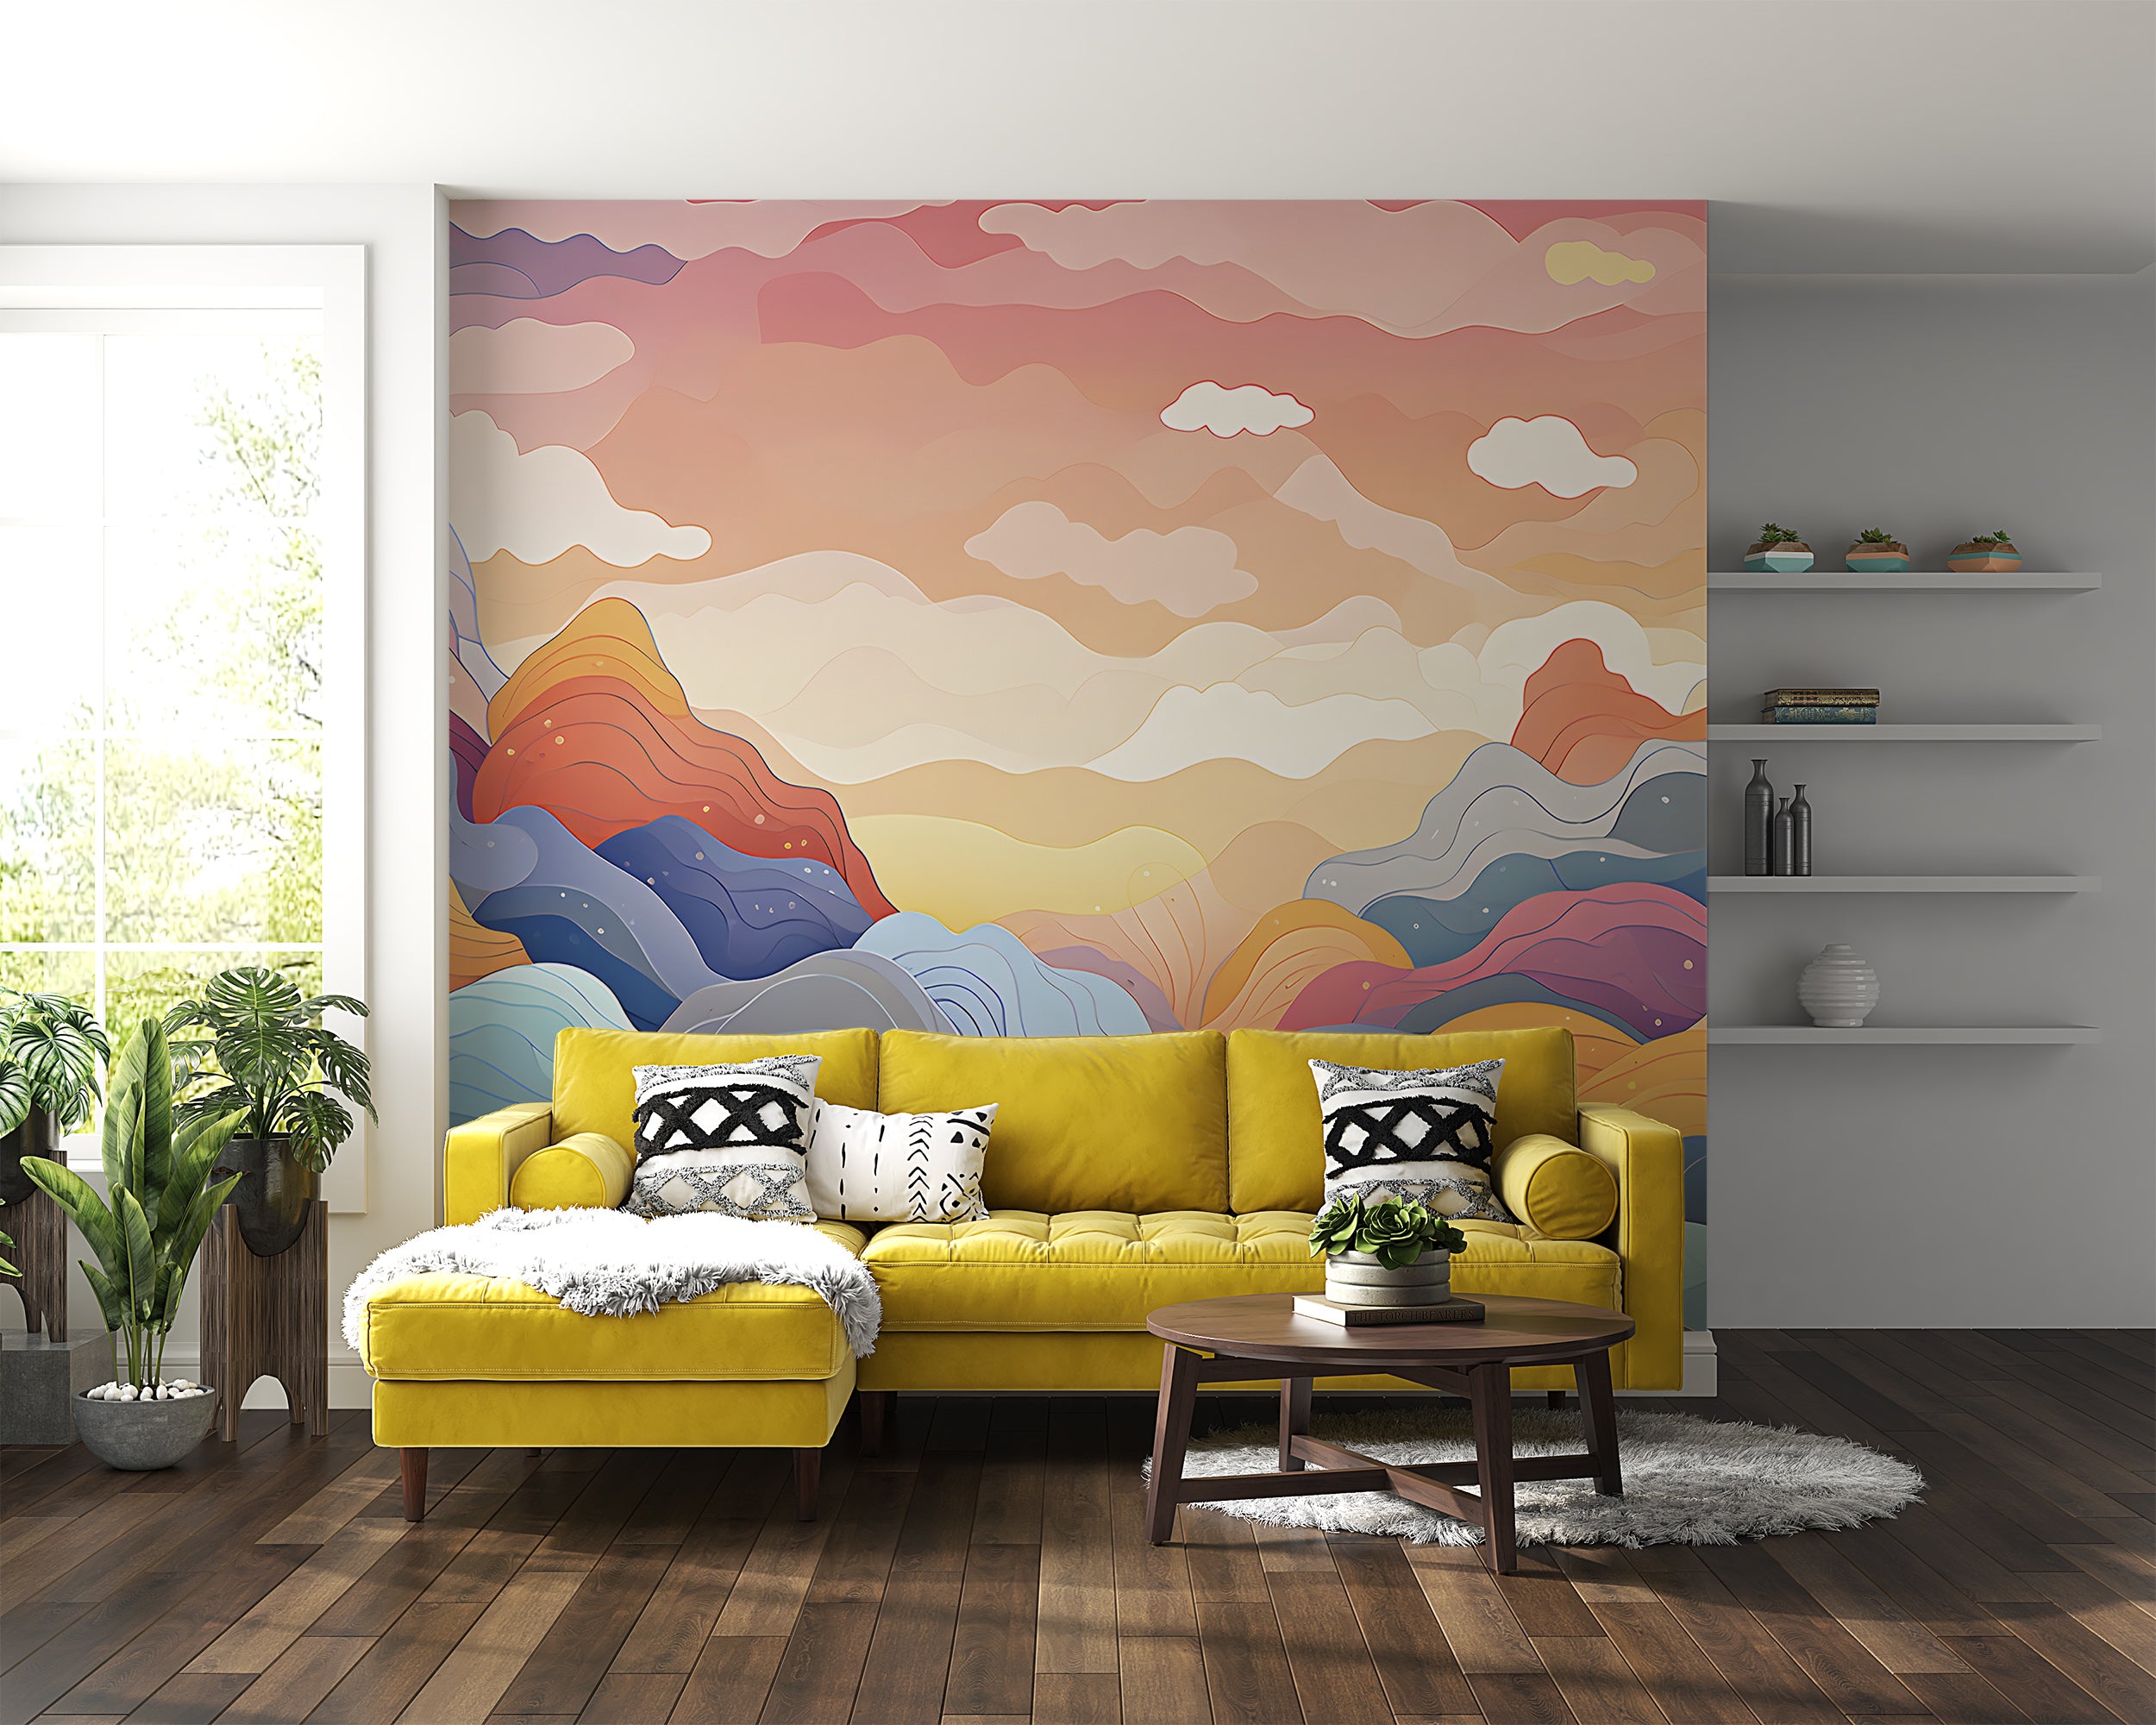 Artistic Wallpaper for a Modern Space